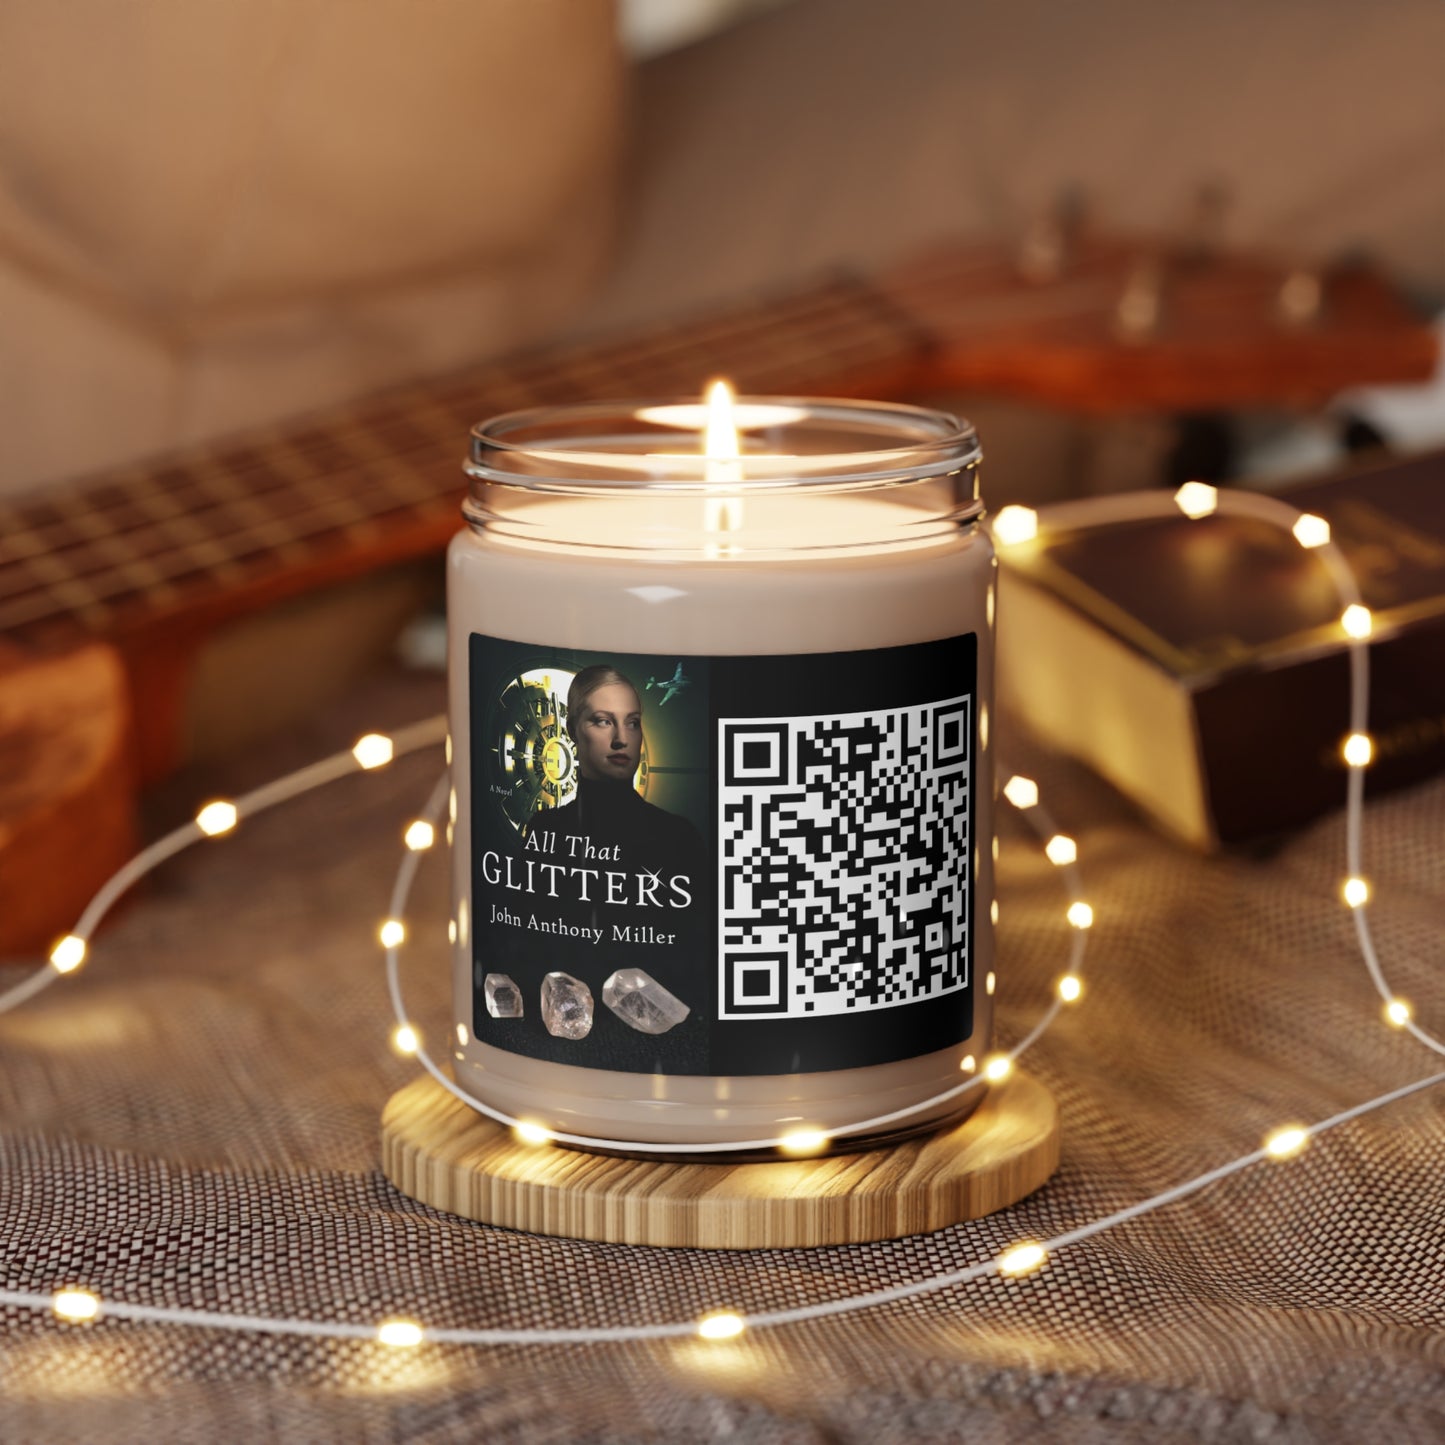 All That Glitters - Scented Soy Candle